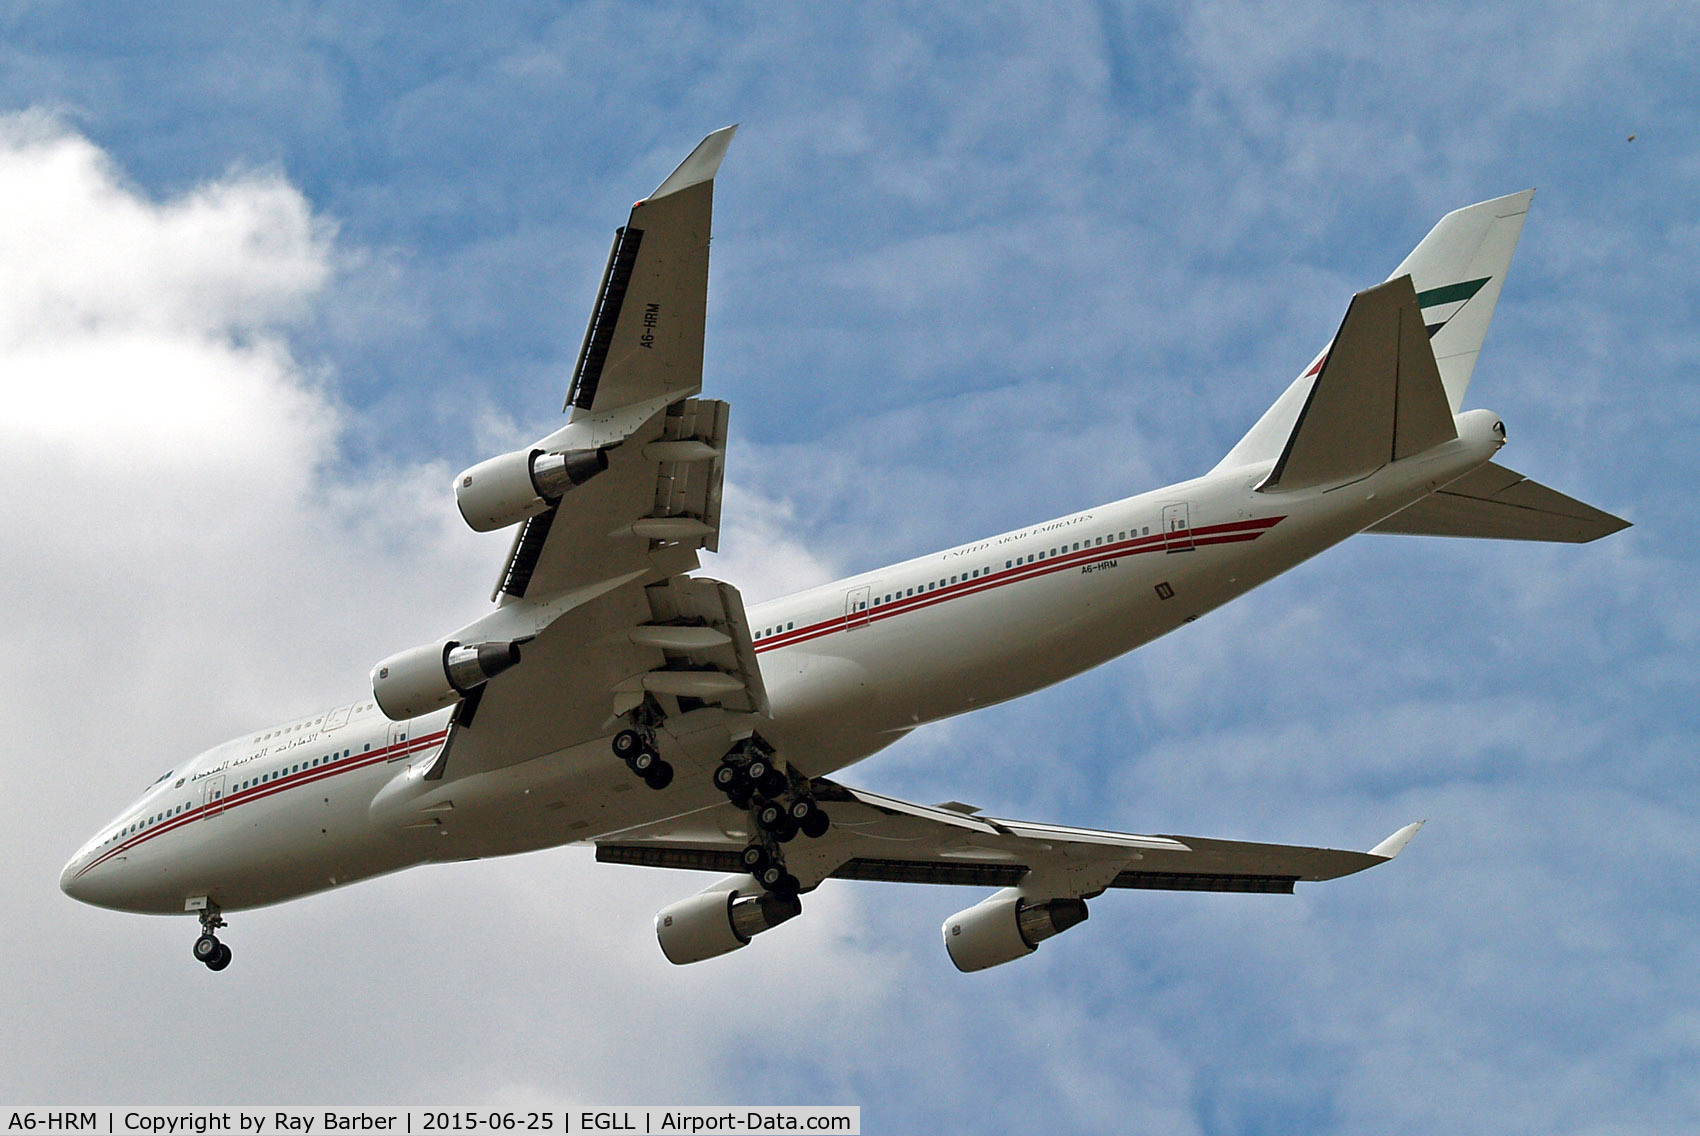 A6-HRM, 1998 Boeing 747-422 C/N 26903, Boeing 747-422 [26903] (Dubai Government) Home~G 25/06/2015. On approach 27R.